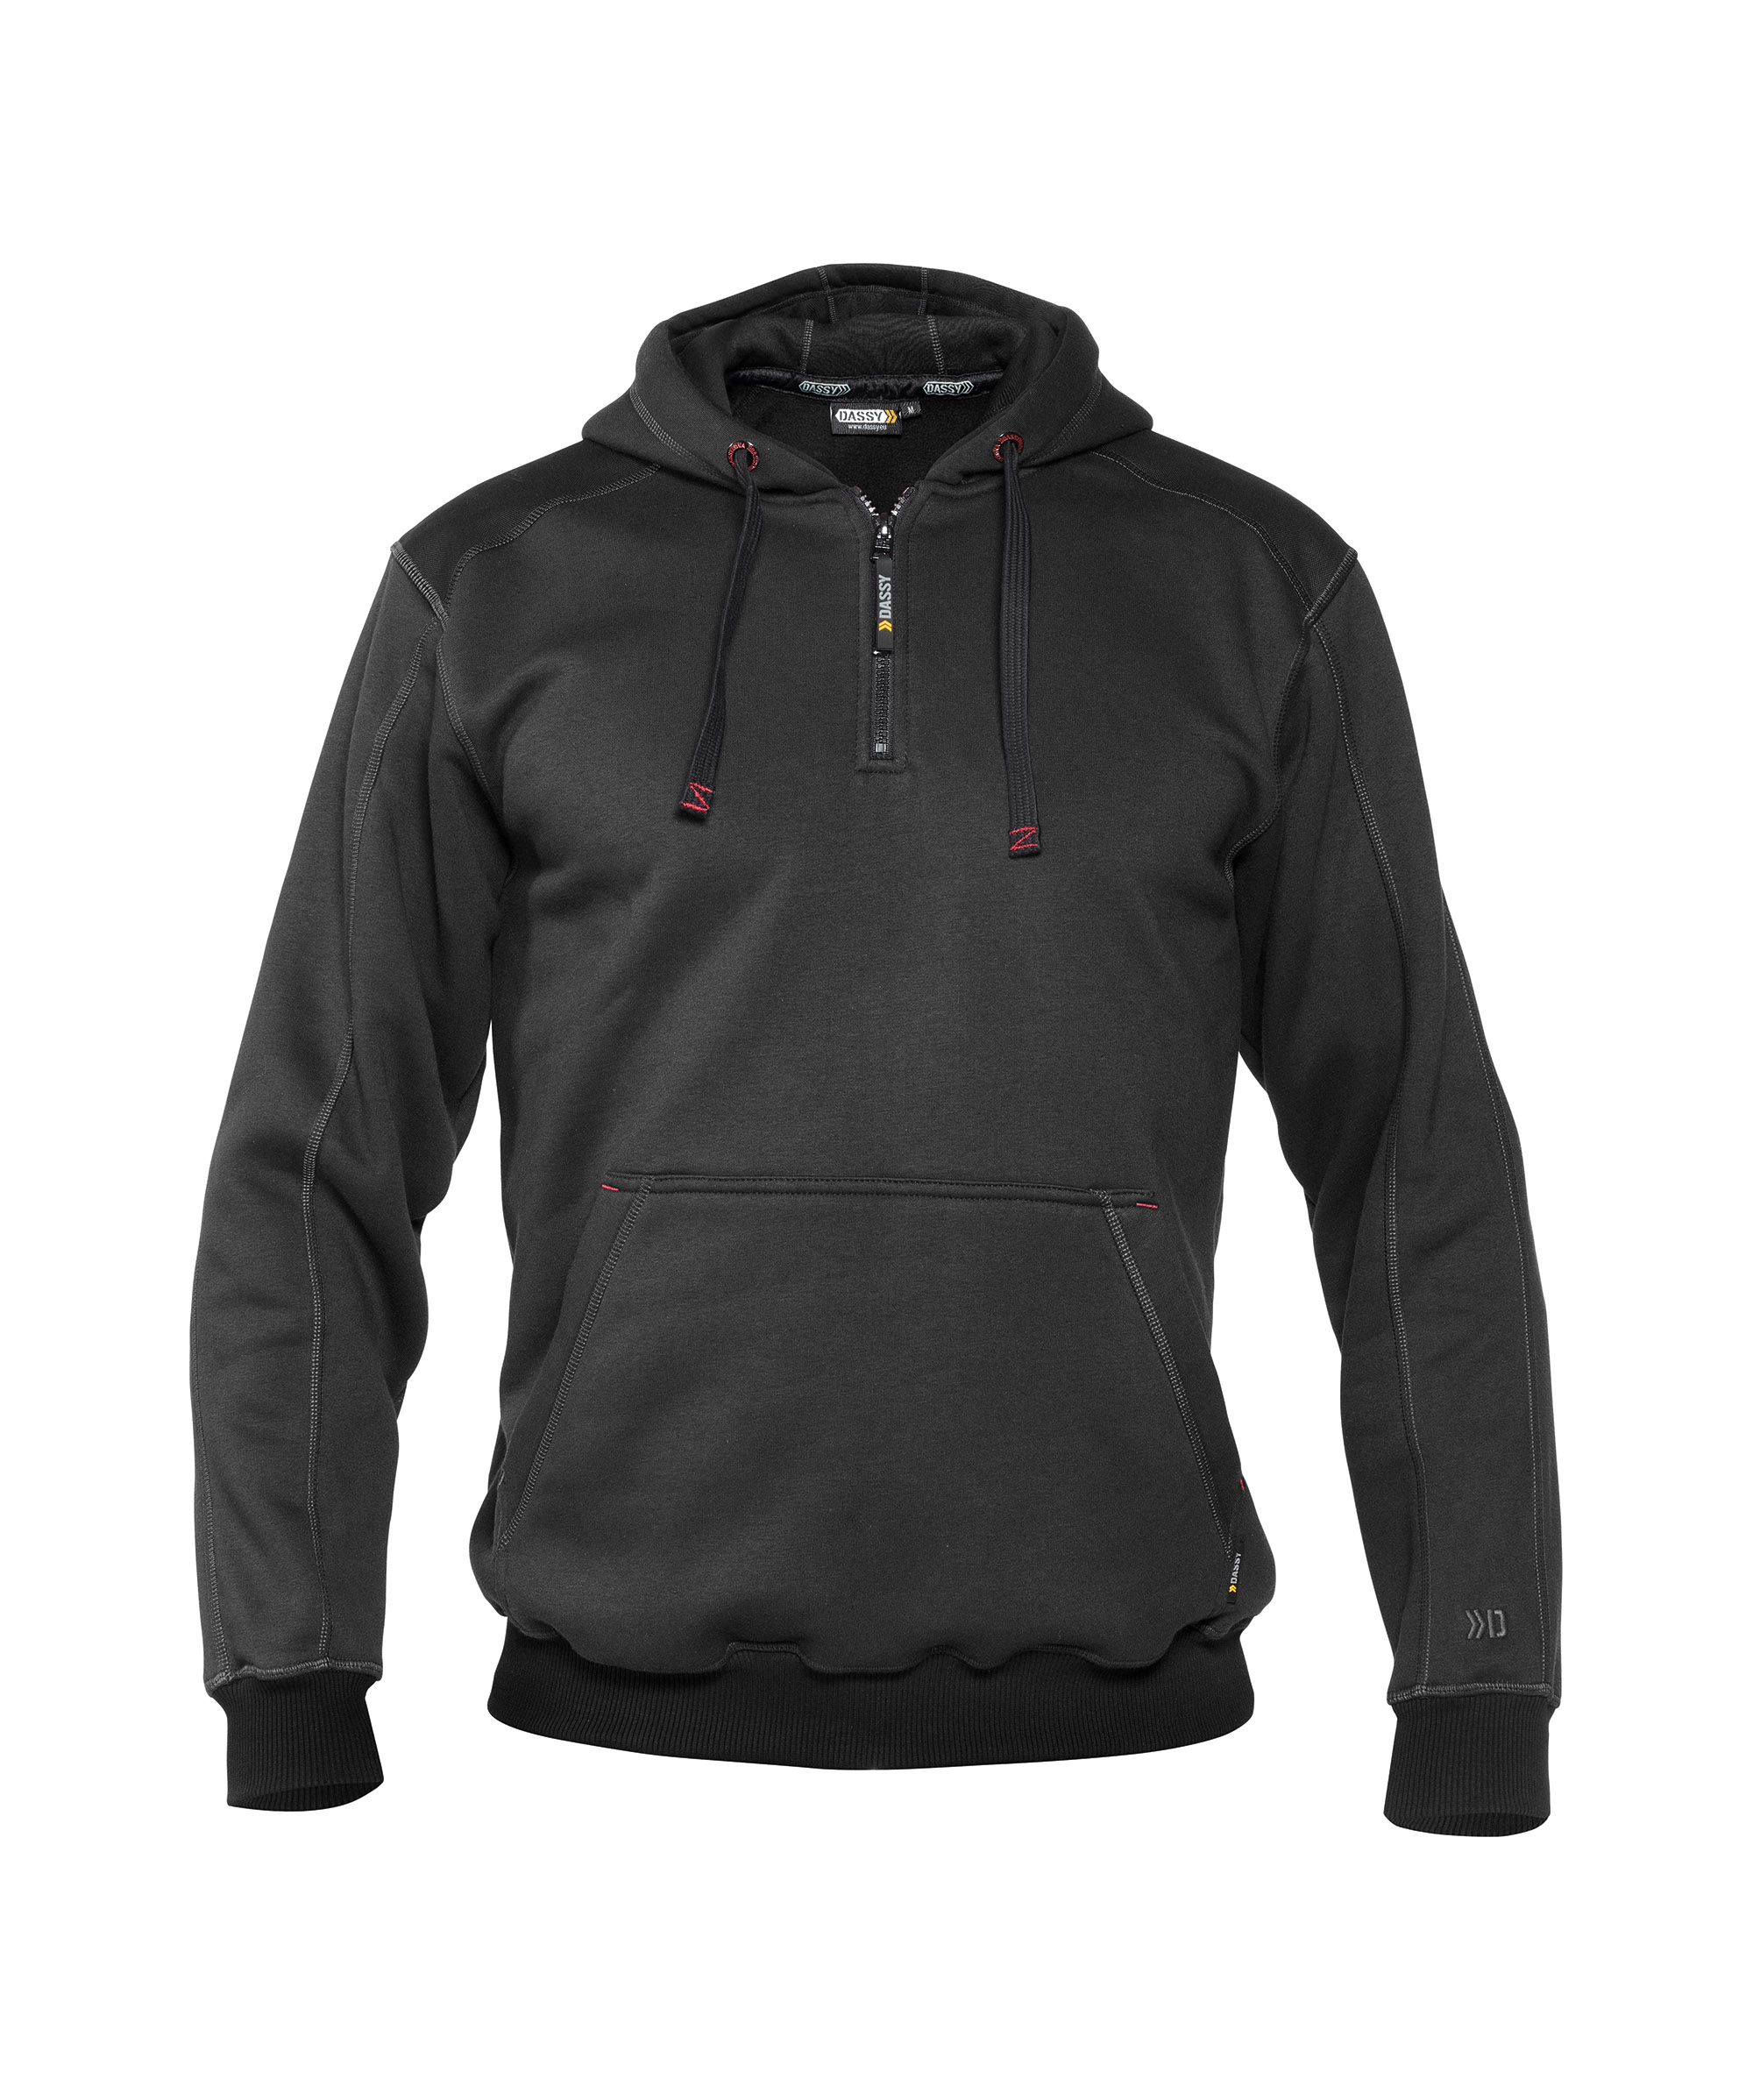 indy_hooded-sweatshirt-reinforced-with-canvas_anthracite-grey-black_front.jpg